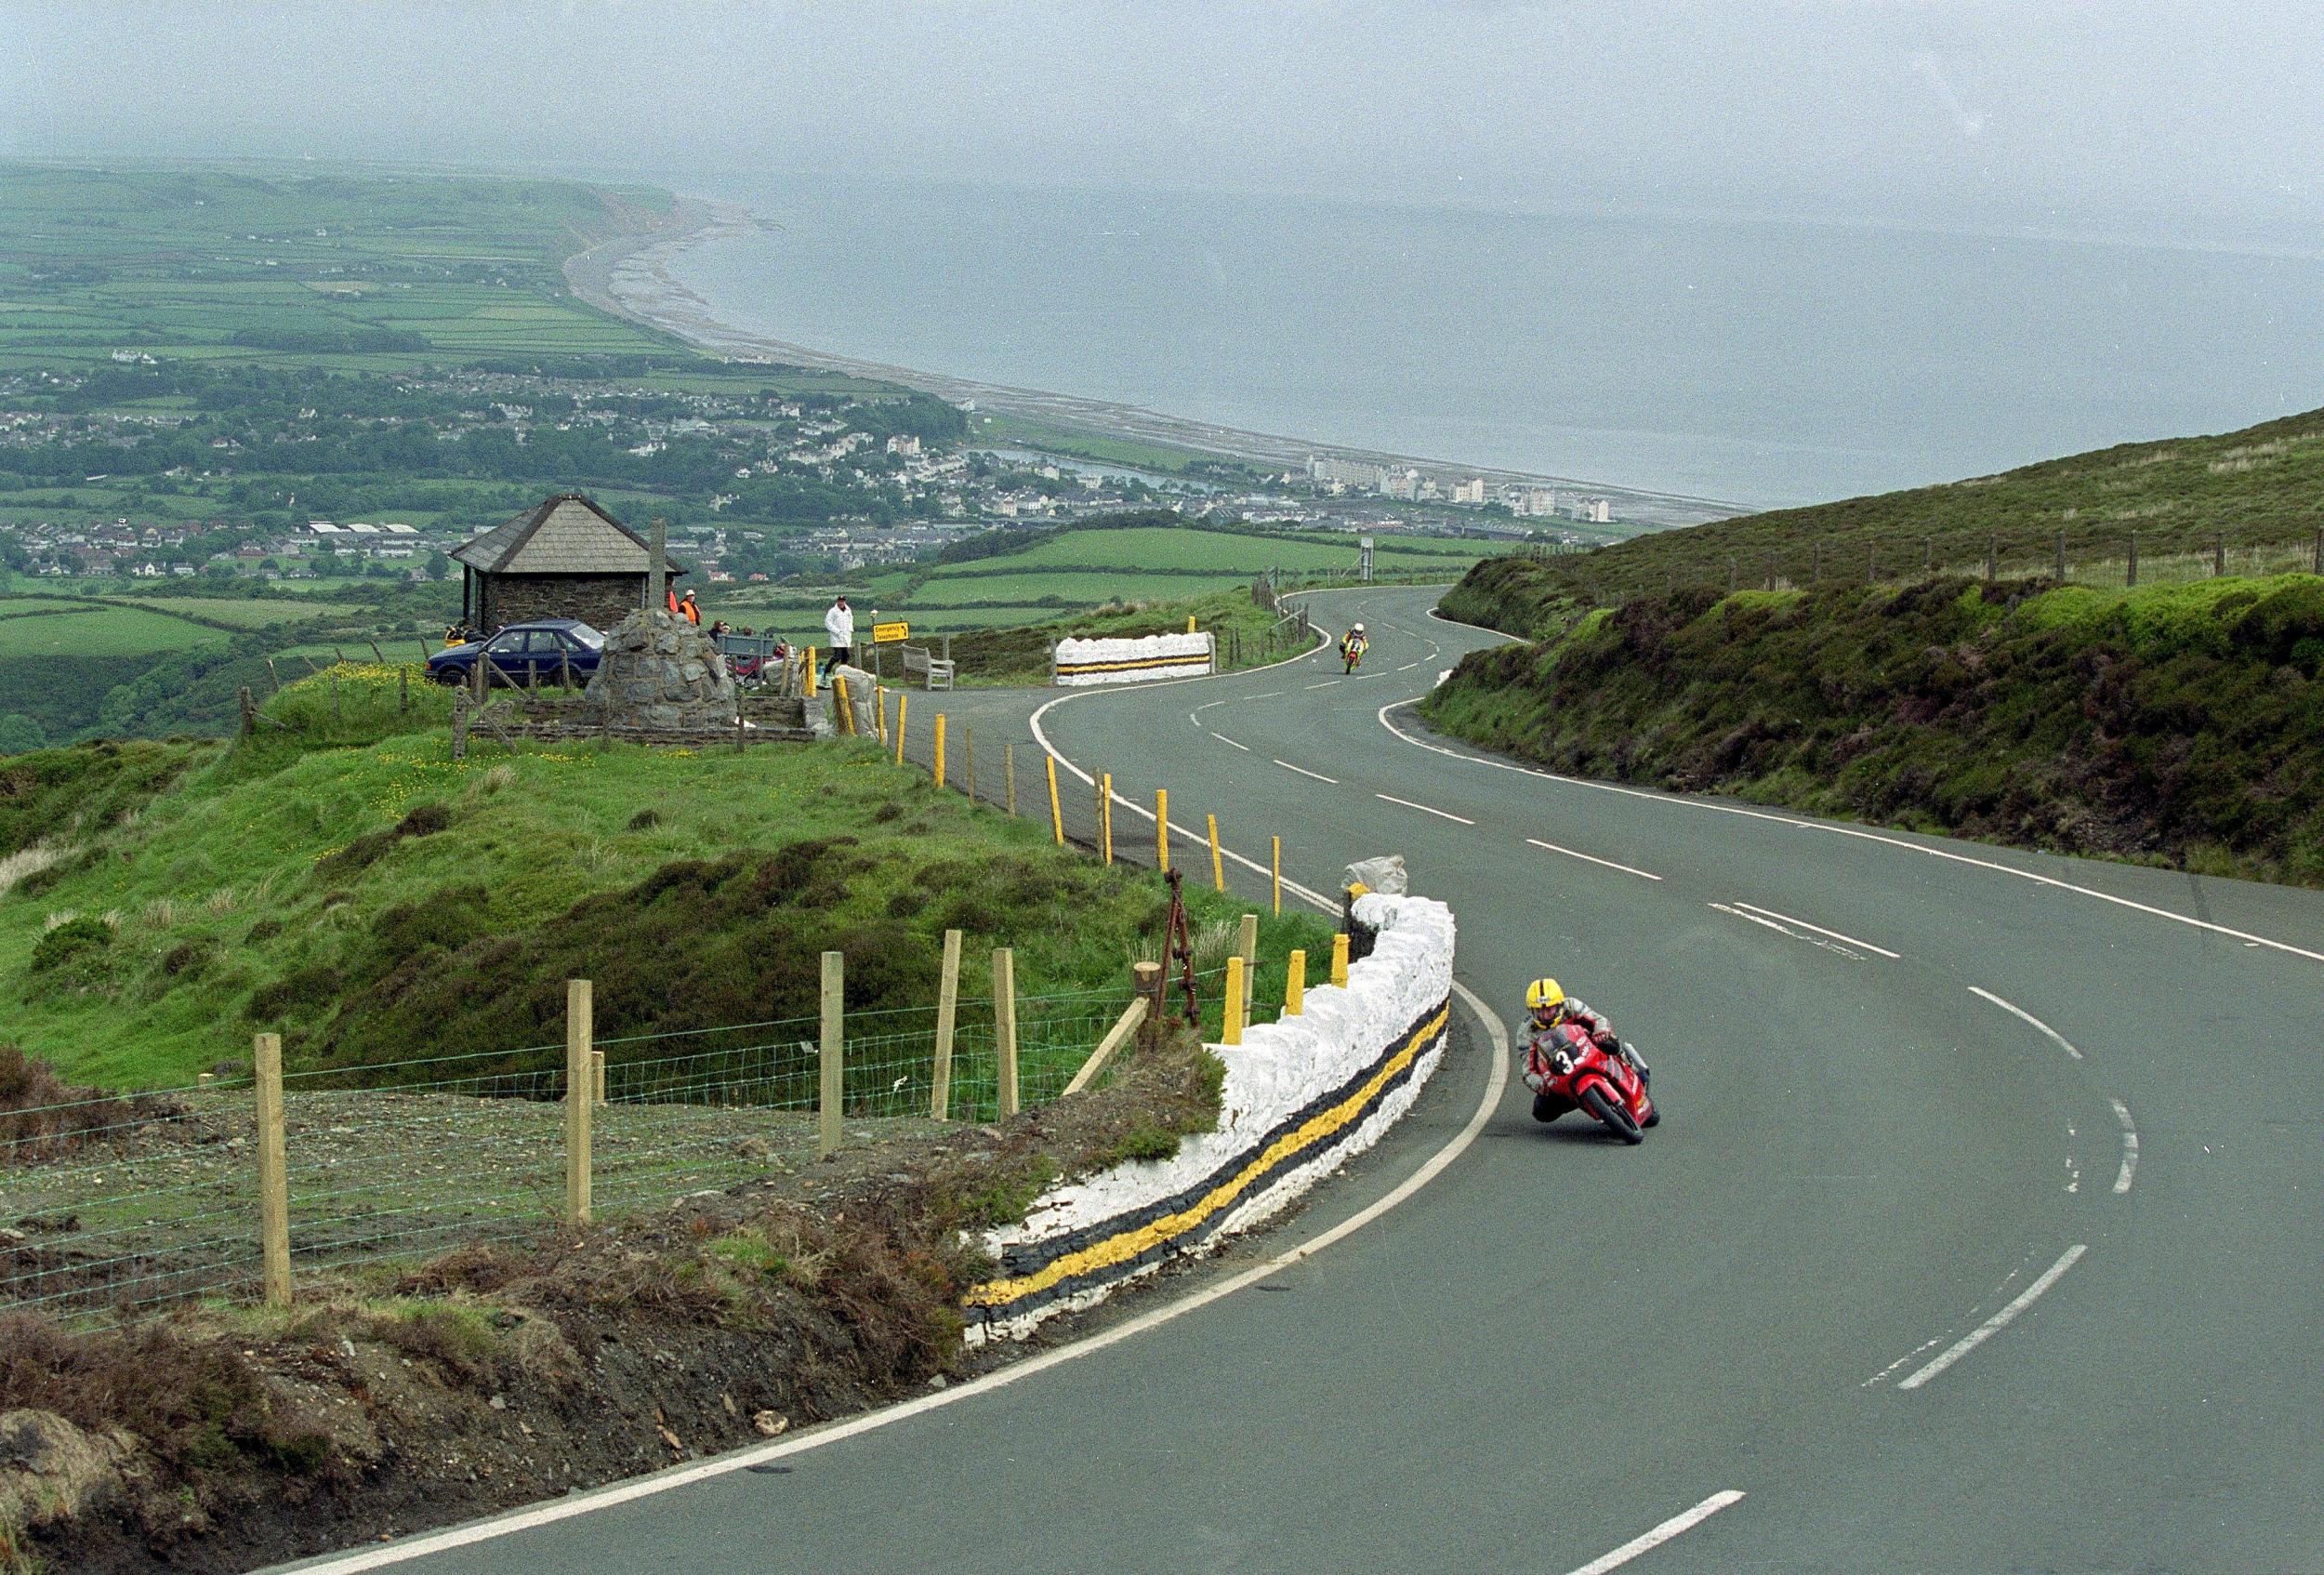 No one has won more races at the Isle of Man than Joey Dunlop